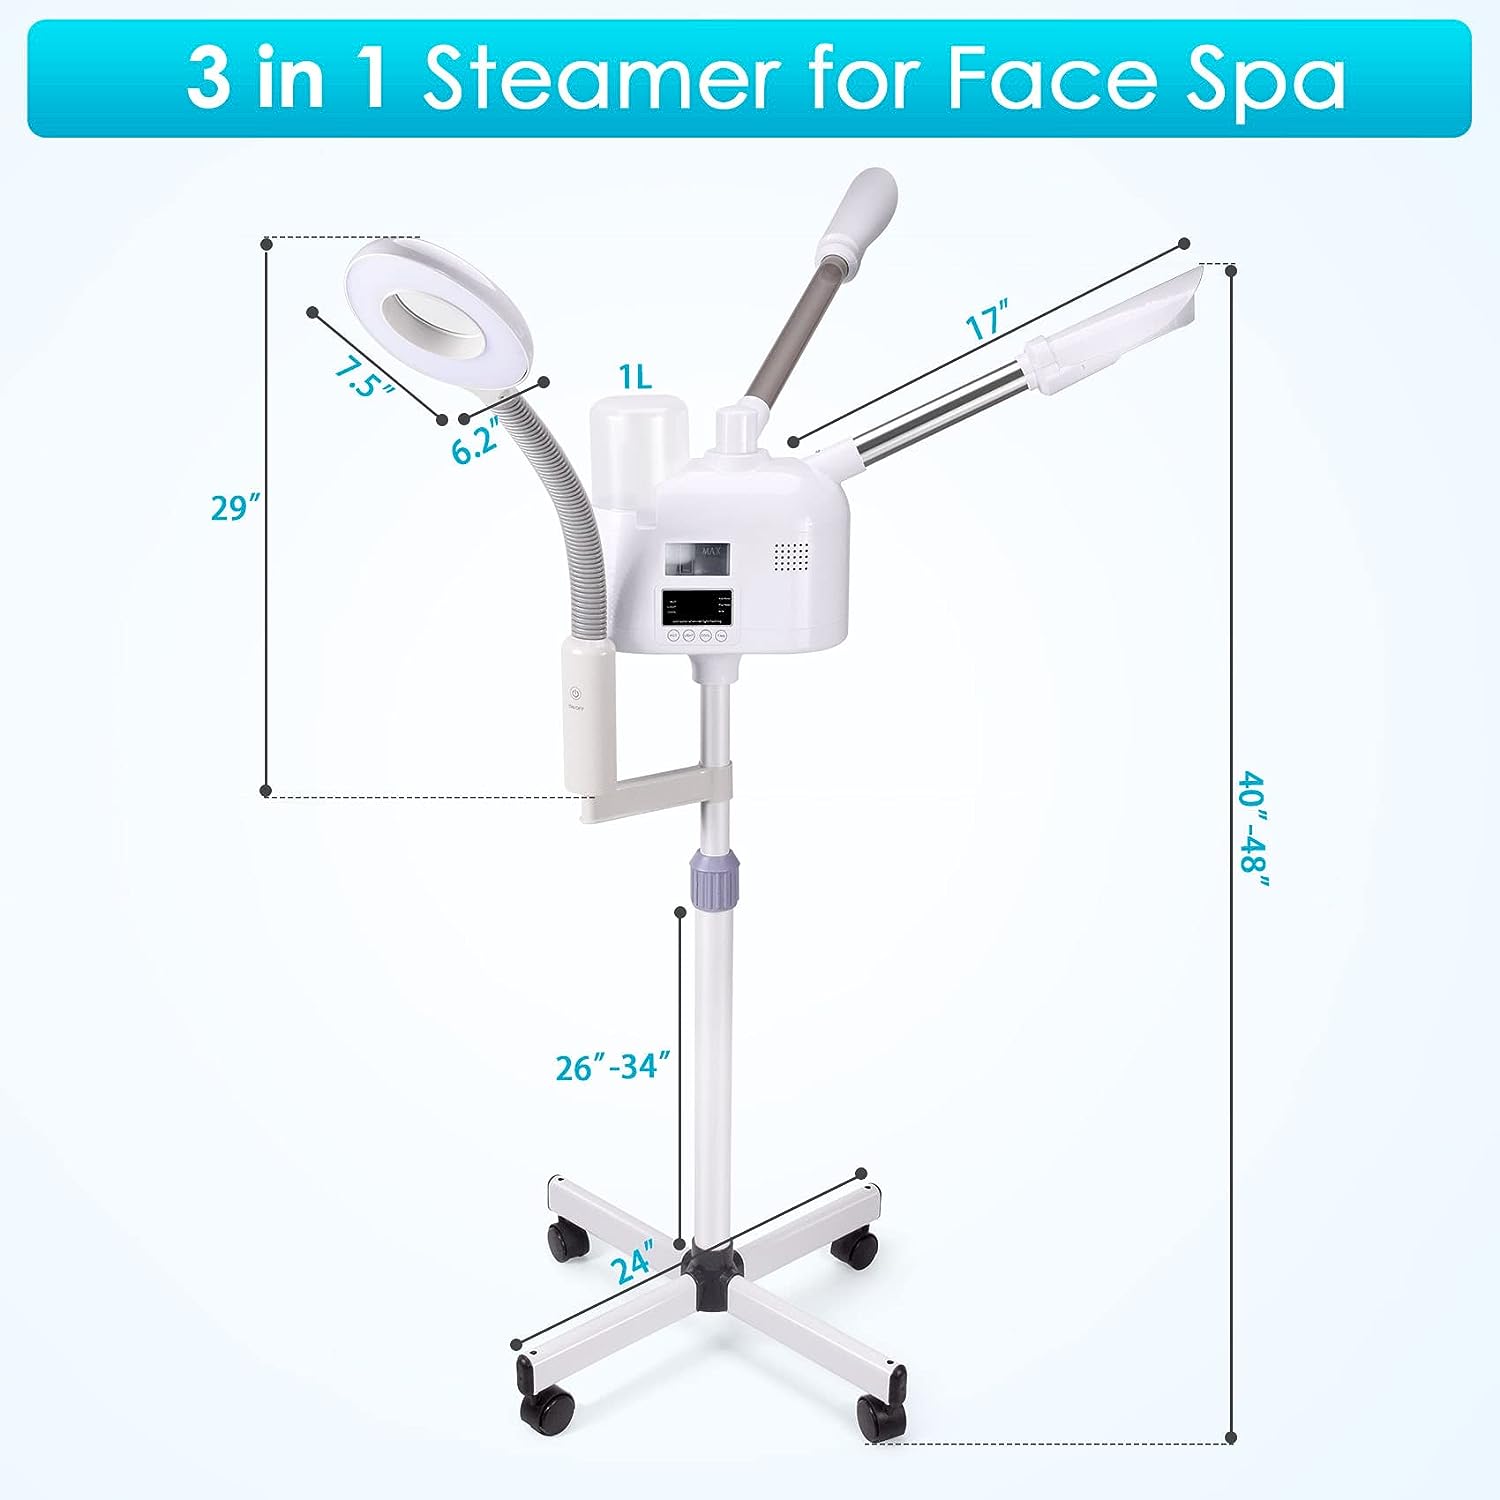 Seeutek Pro Rolling Facial Steamers for Face Professional 3 in 1 Facial Steamer Humidifier with 5X Mag Lamp,Face Steamer Standing Warm Cold Mist Digital LCD Screen for Home Salon Spa